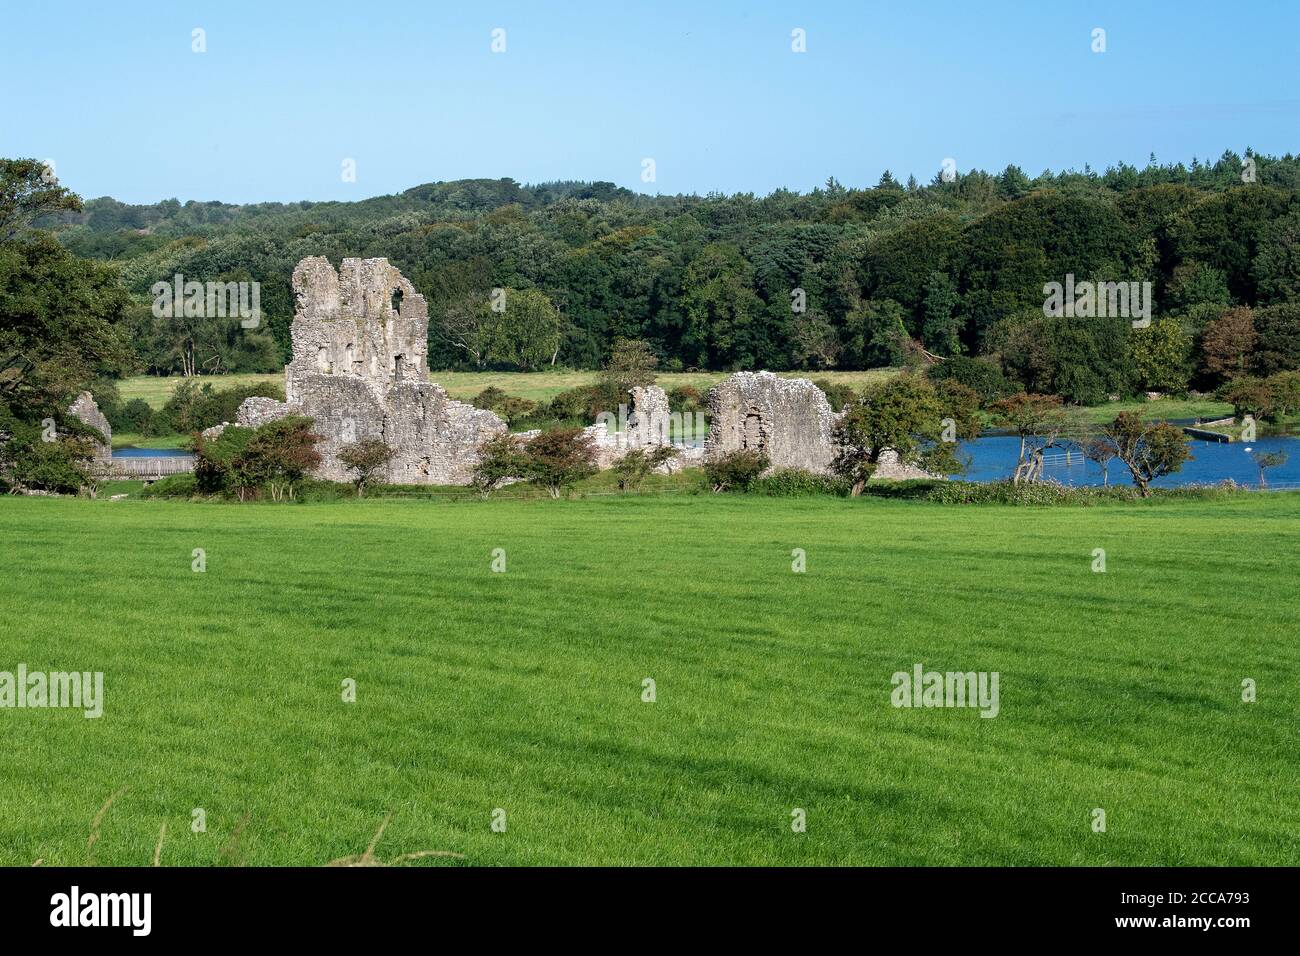 Ogmore Castle is a Grade I listed castle located near the village of Ogmore-by-Sea, in the Vale of Glamorgan South Wales. Stock Photo